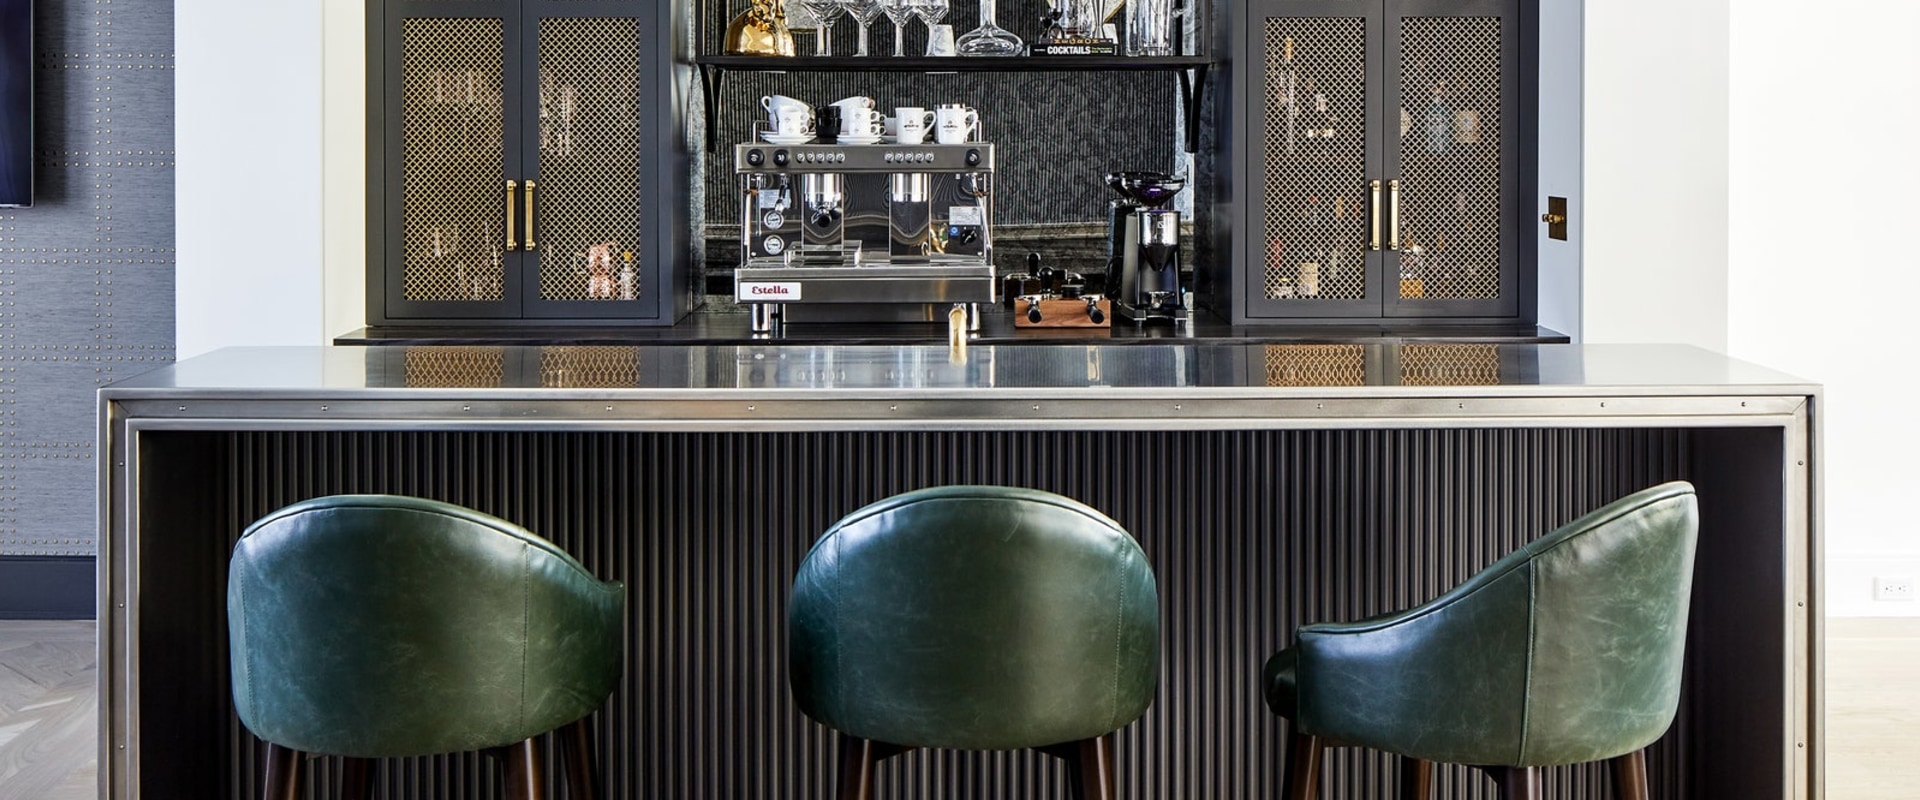 Creating a Cohesive Look with Bar Decor and Accessories